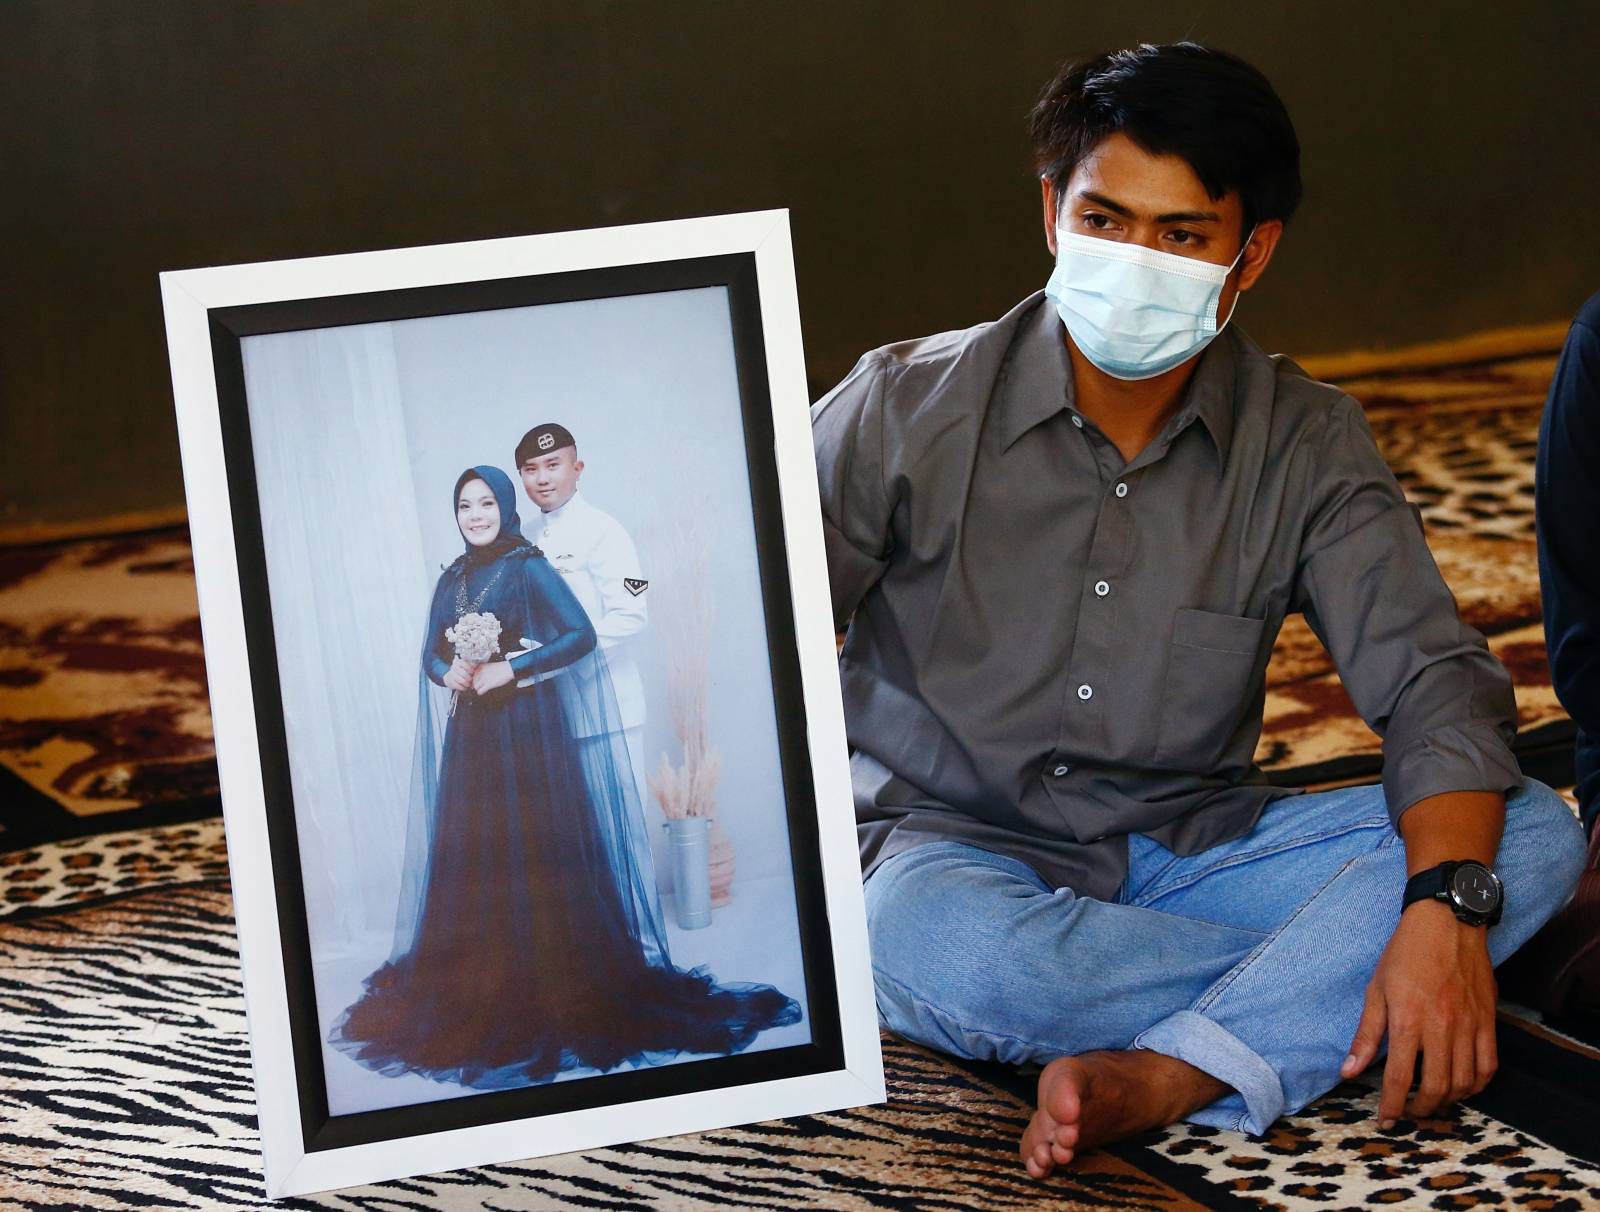 Imam Yoga, 26-year-old brother-in-law of Pandu Yudha Kusuma, 23, one of the crew members of the sunken KRI Nanggala-402 submarine, shows a photograph during an interview at his parents' house in Banyuwangi